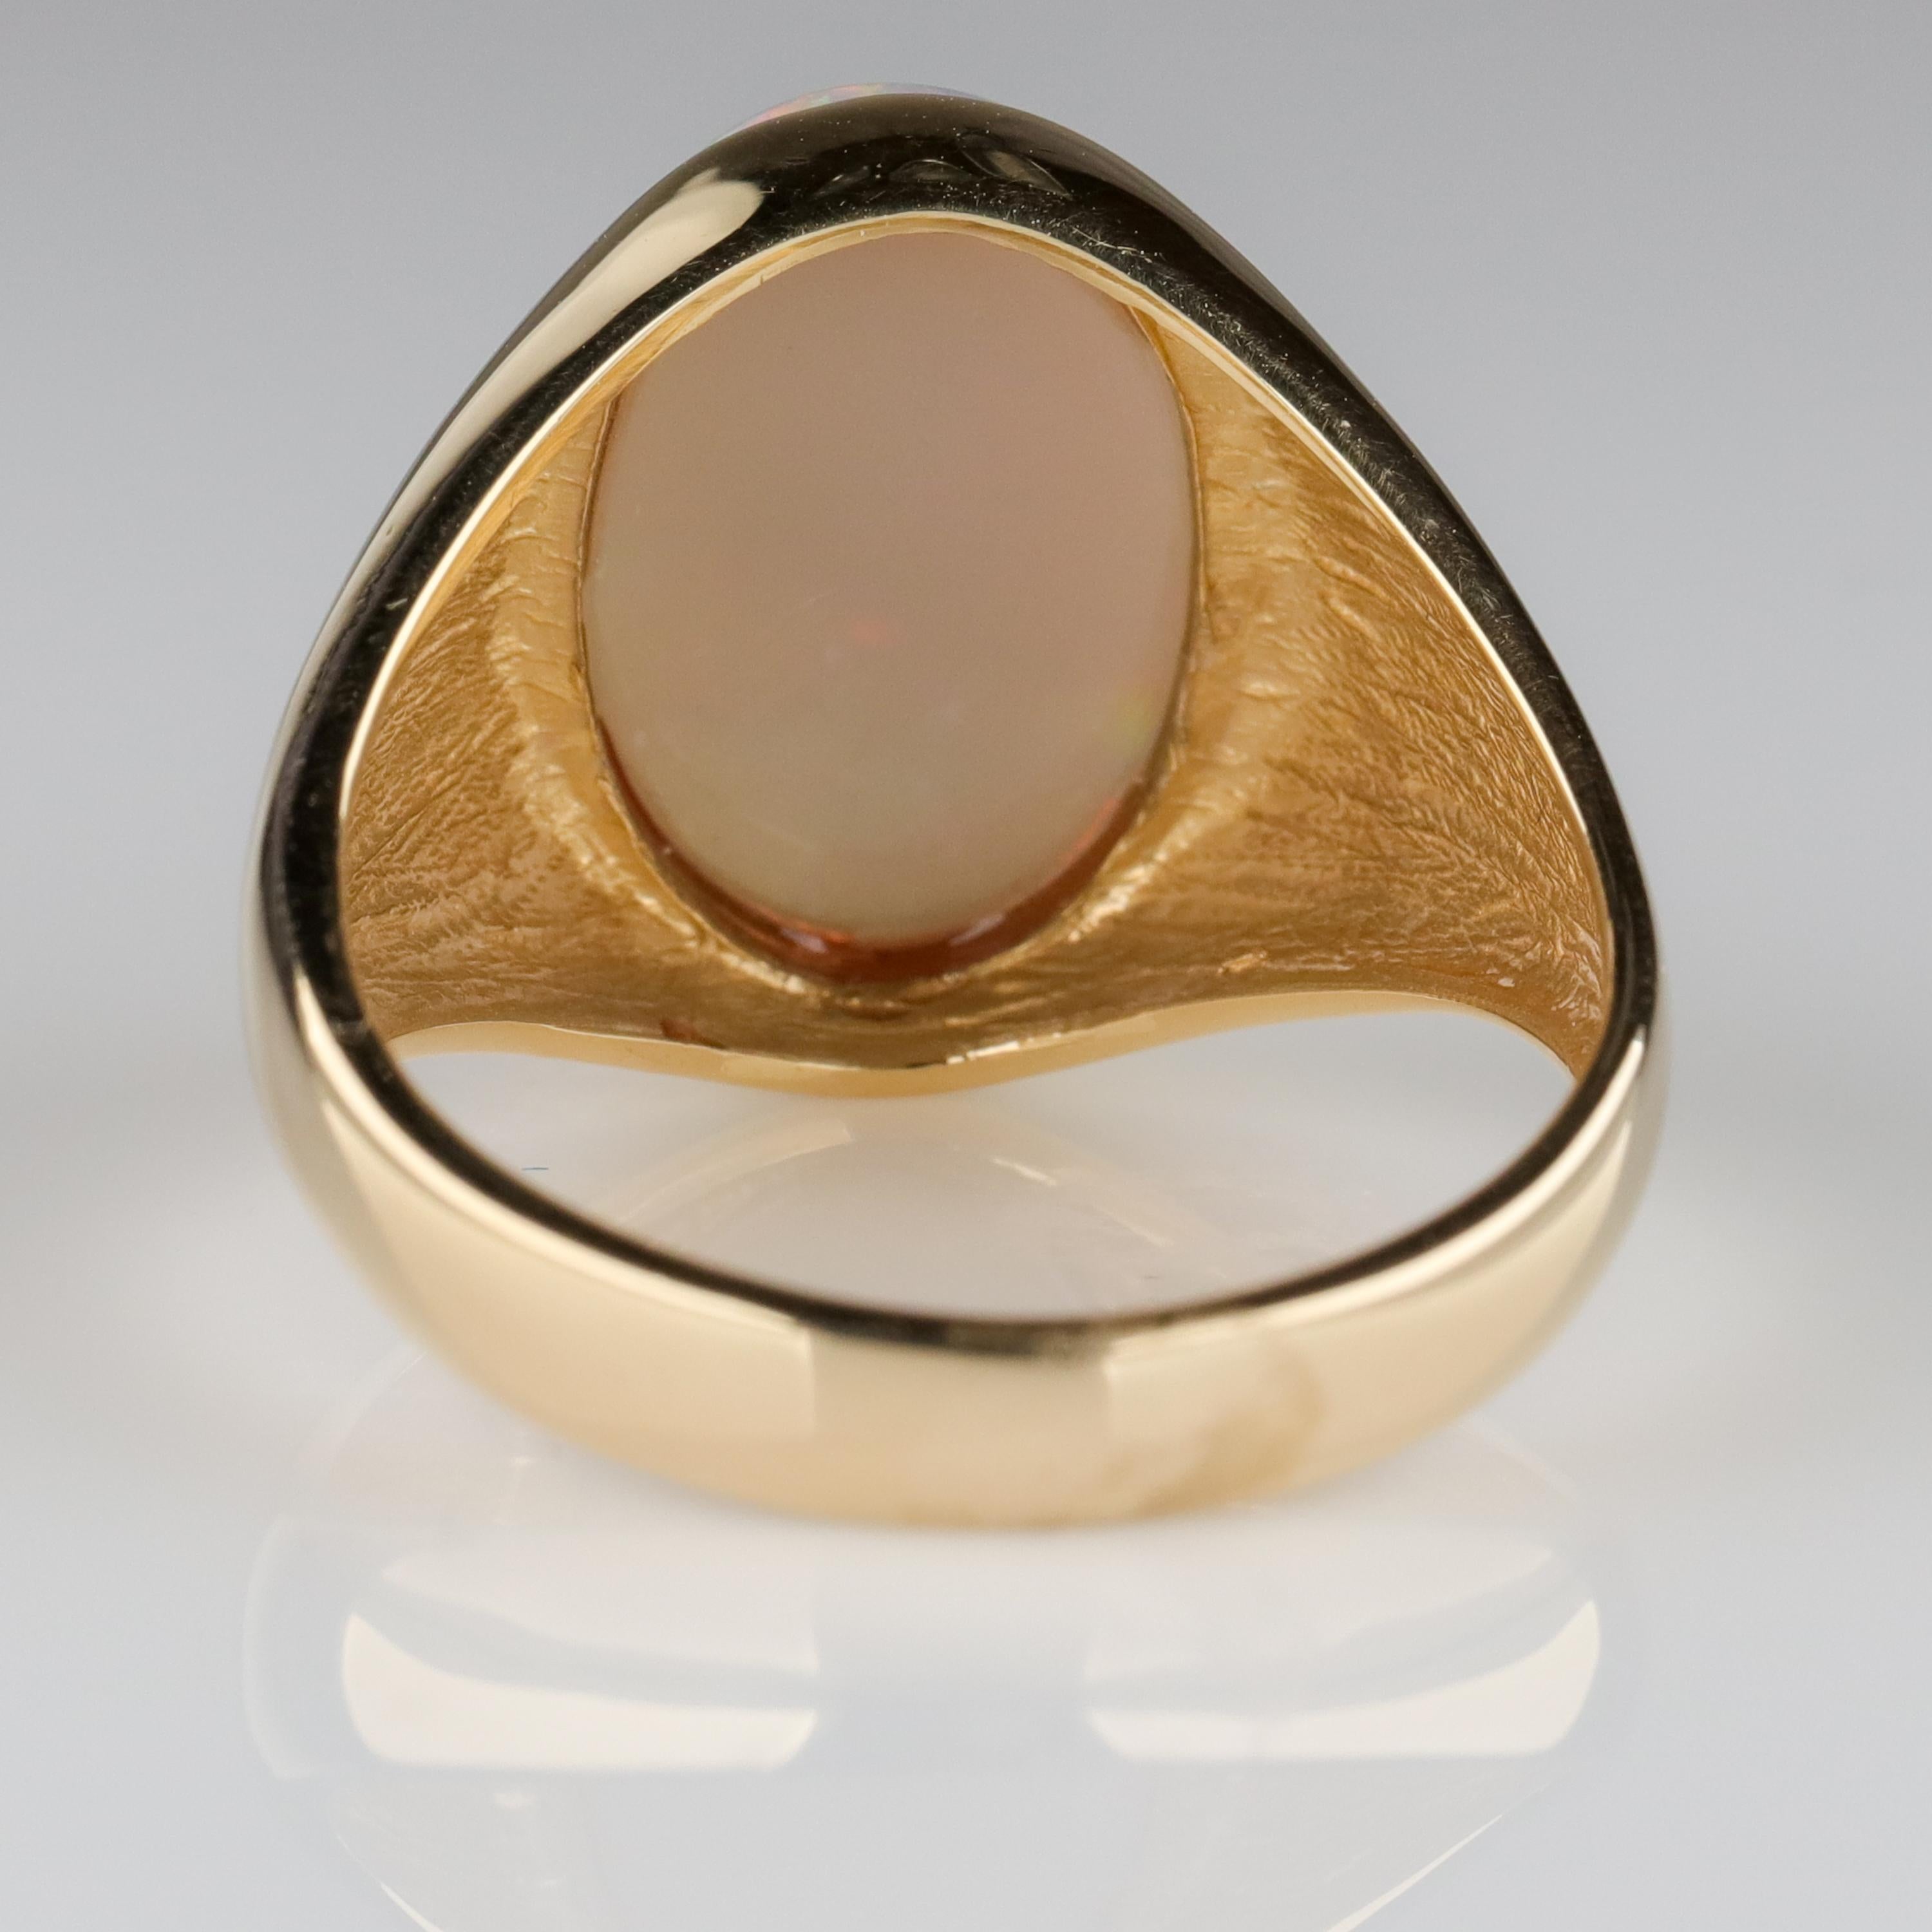 Contemporary Men's Australian White Opal Ring with Full Spectrum Broad Flash